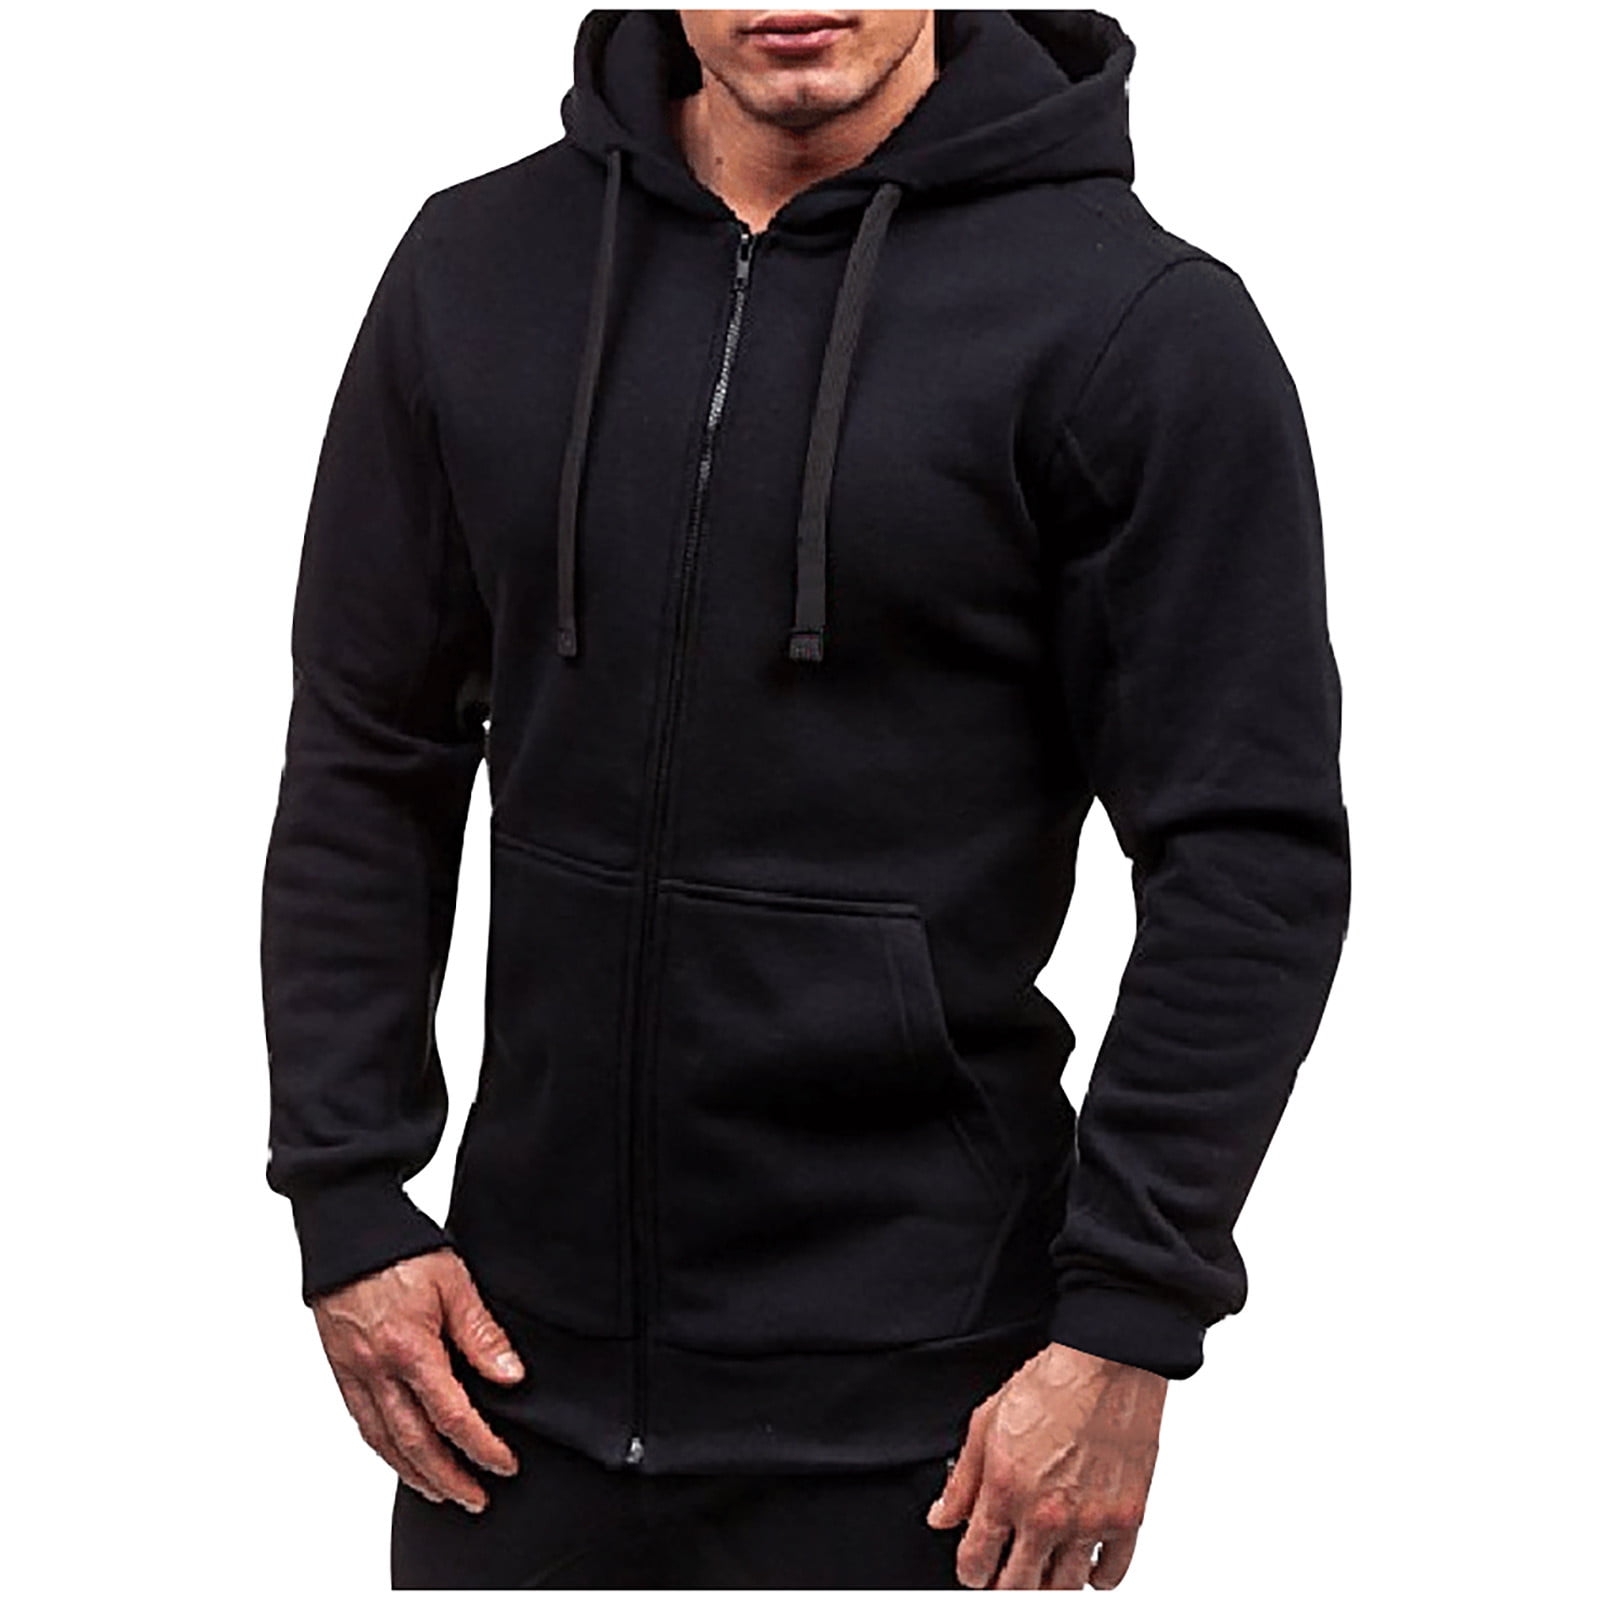 Mens Hoodies Lightweight Slim Casual Long Sleeve Solid Hooded Pullover Sweatshirts Outwear Jacket Coats with Pockets 